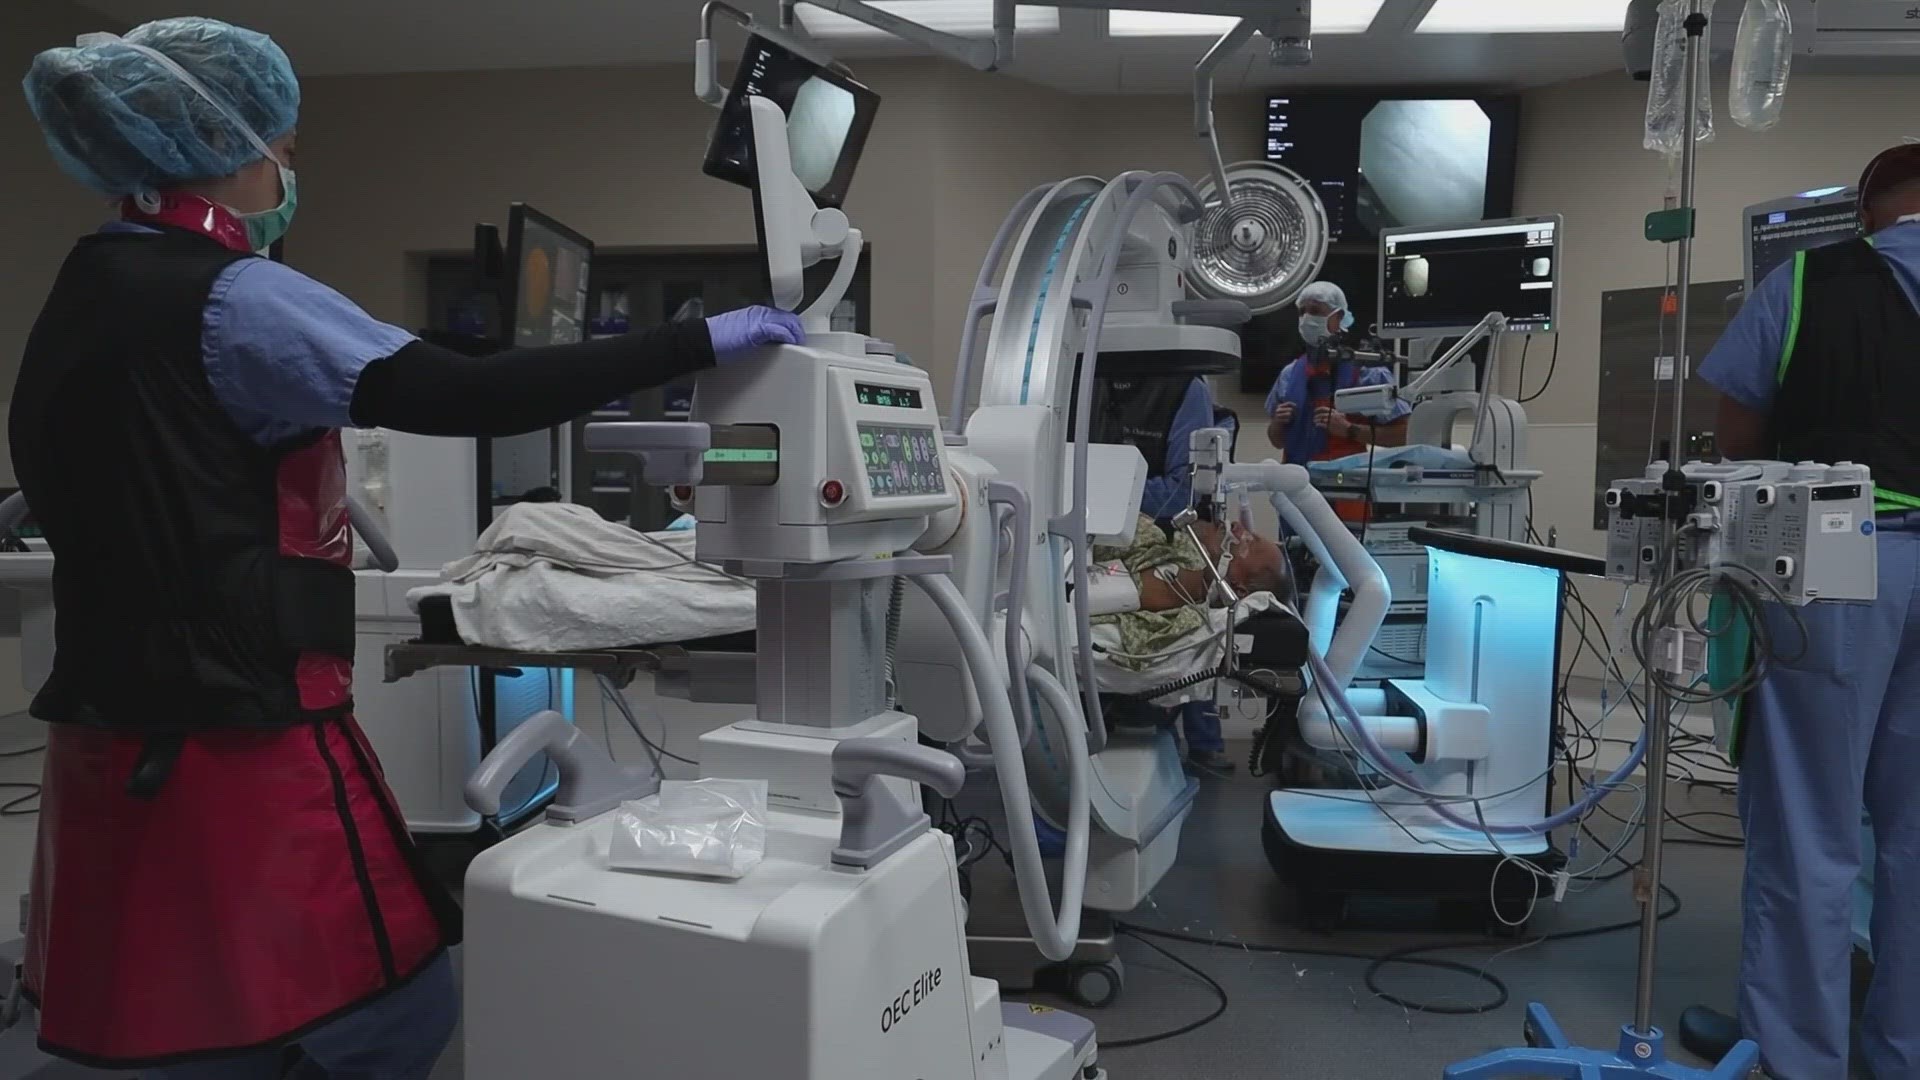 More than 100,000 Americans will die from lung cancer this year, but the team at HCA Florida uses a new robotic method to find tumors faster and further in the lung.